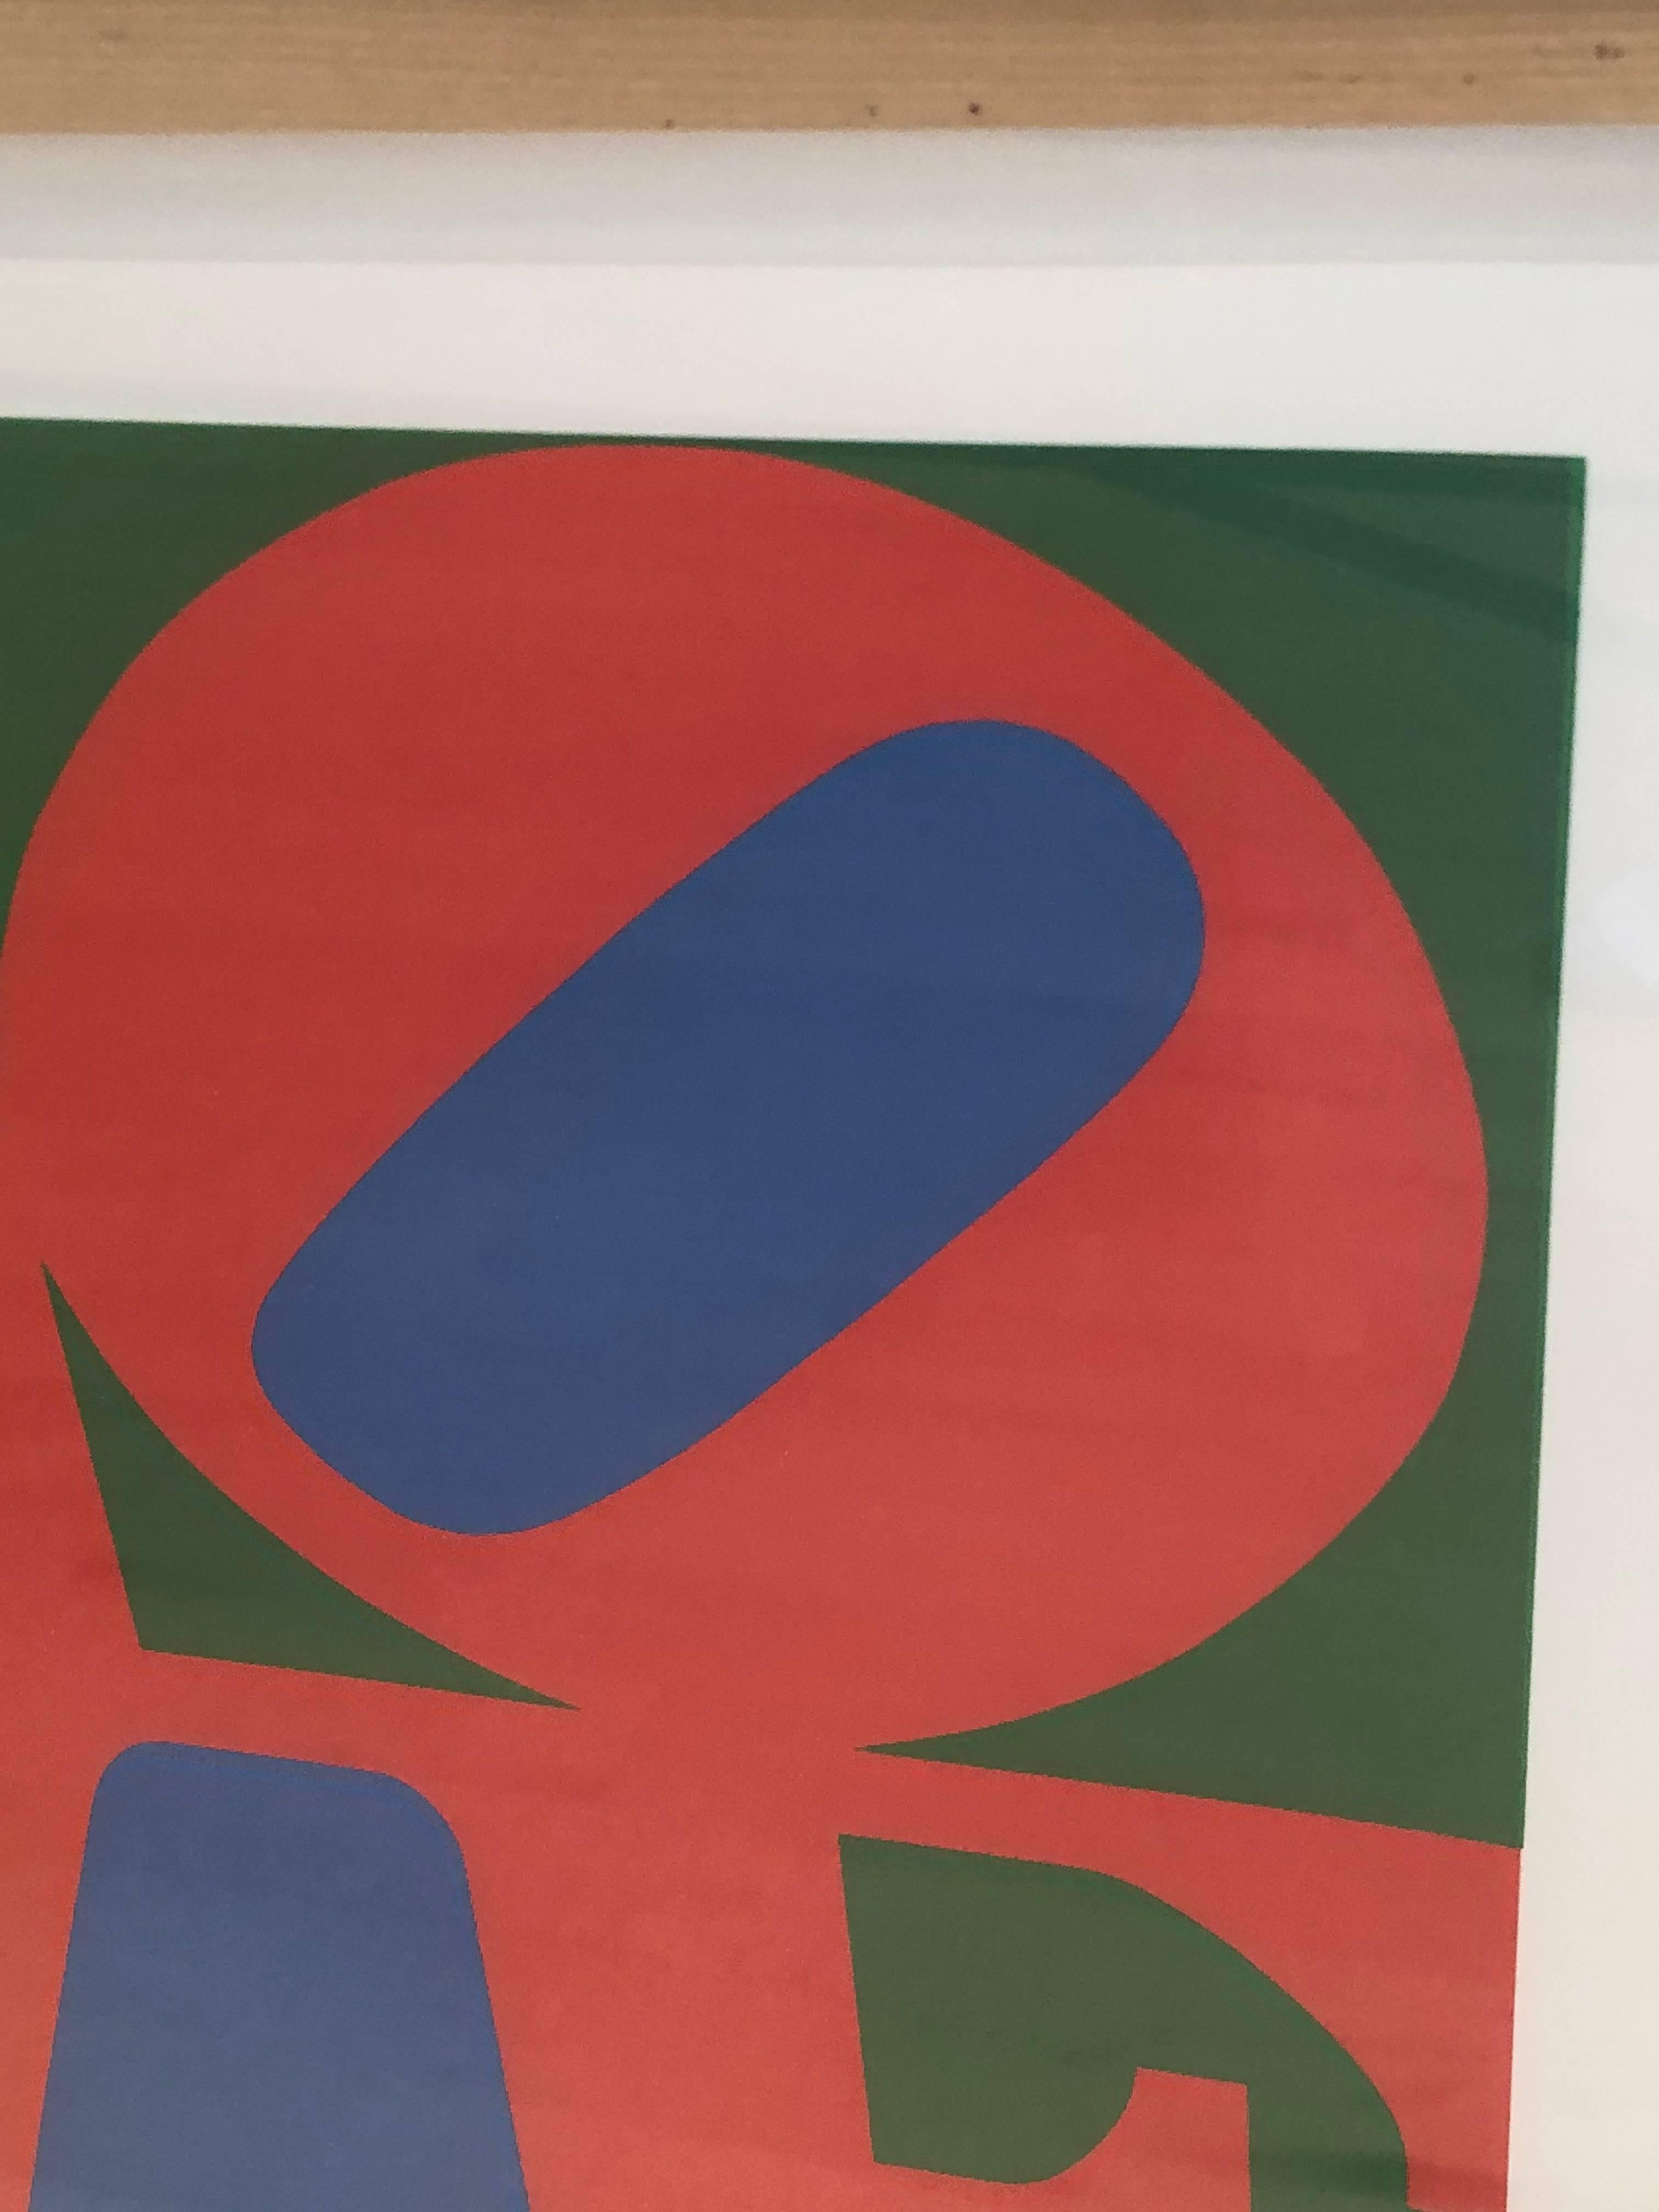 Paint 20th Century Pop Art Signed and Numbered Robert Indiana, LOVE, 1996